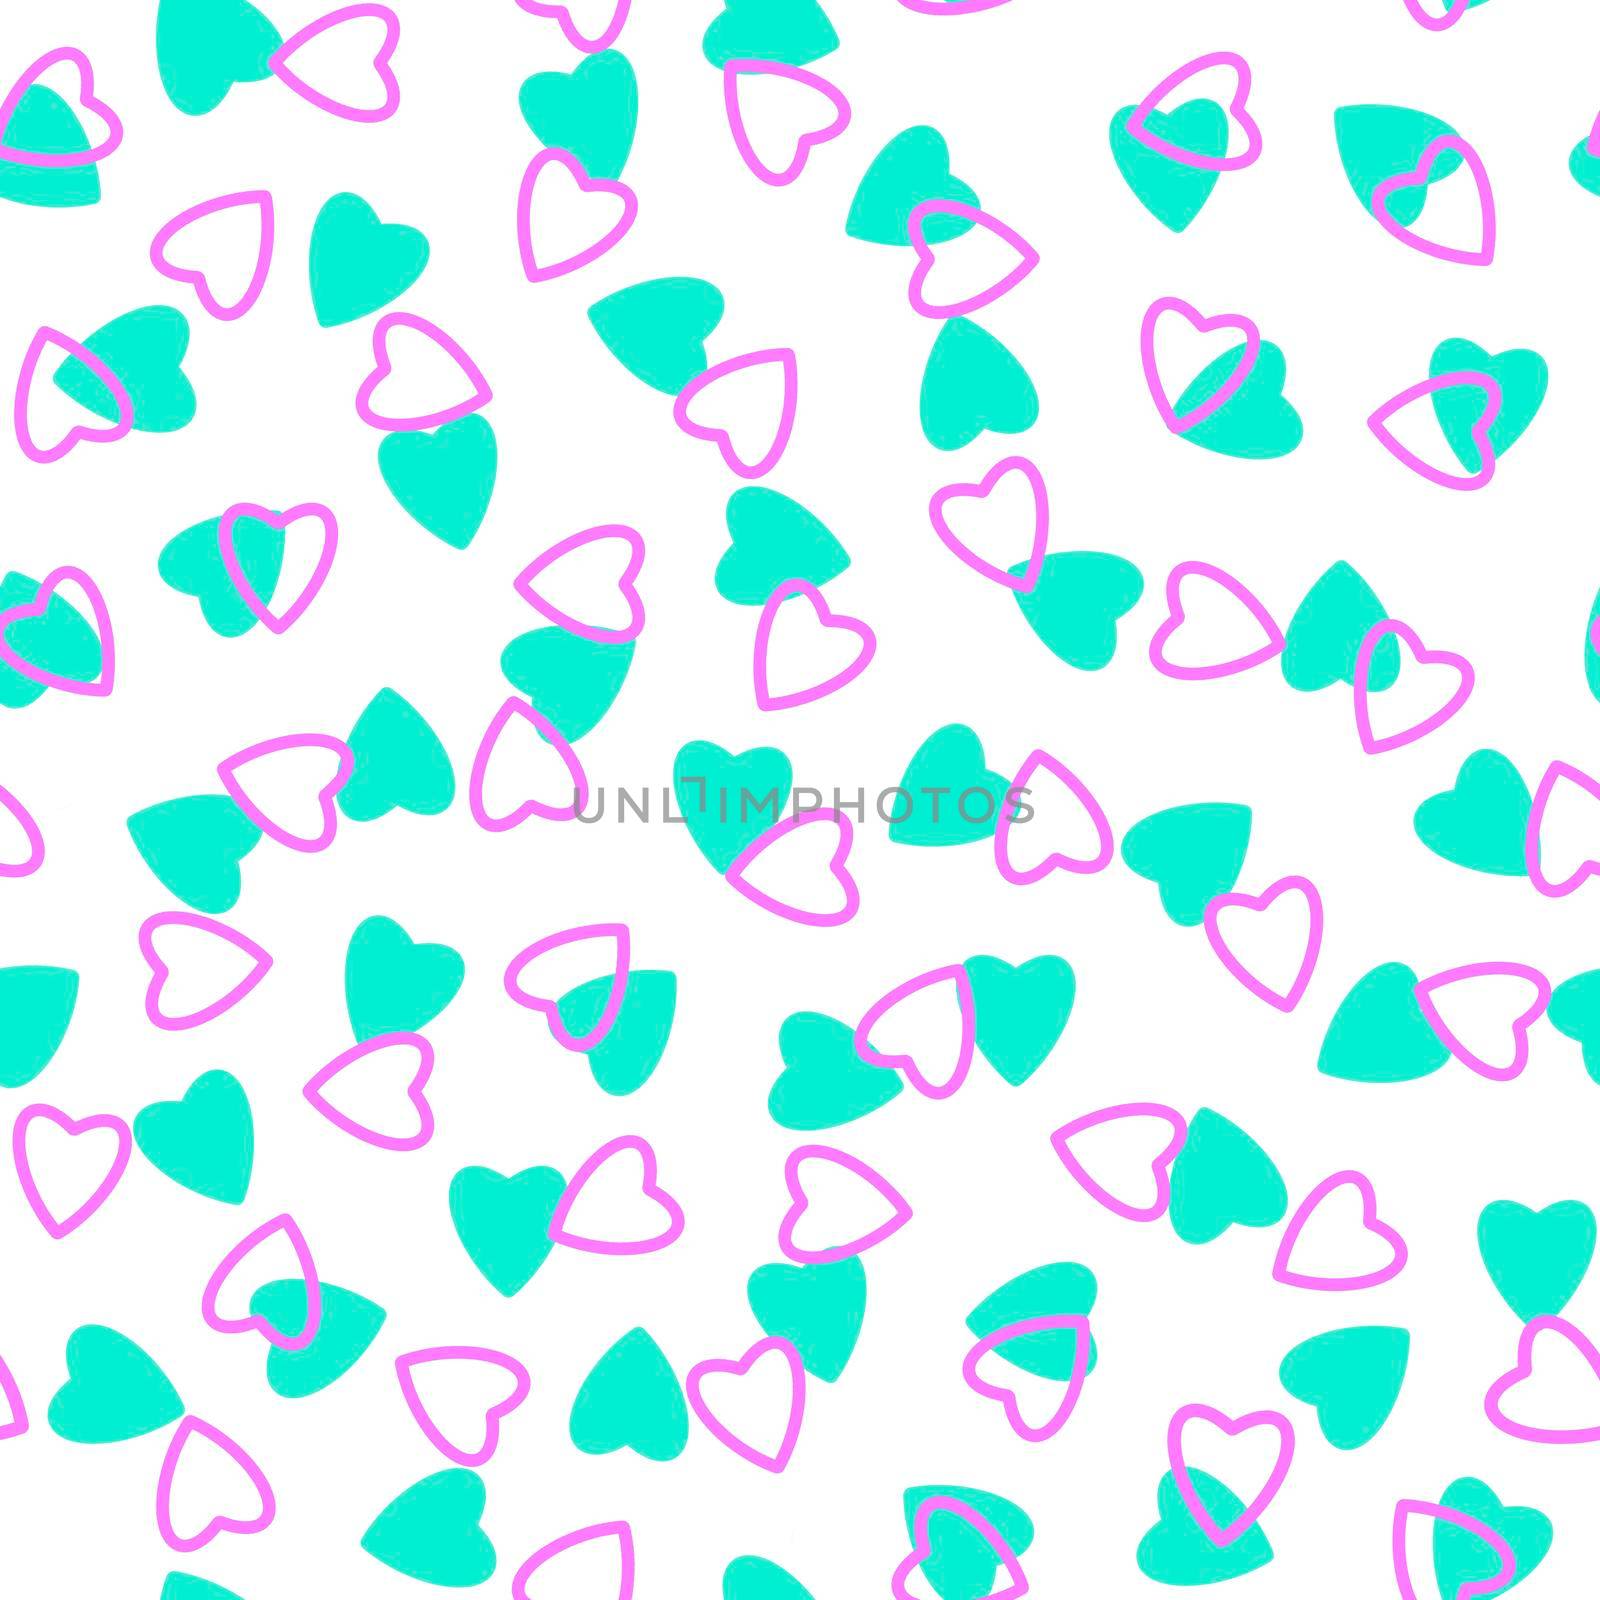 Simple heart seamless pattern,endless chaotic texture made of tiny heart silhouettes.Valentines,mothers day background.Great for Easter,wedding,scrapbook,gift wrapping paper,textiles.Azure,lilac,white by Angelsmoon